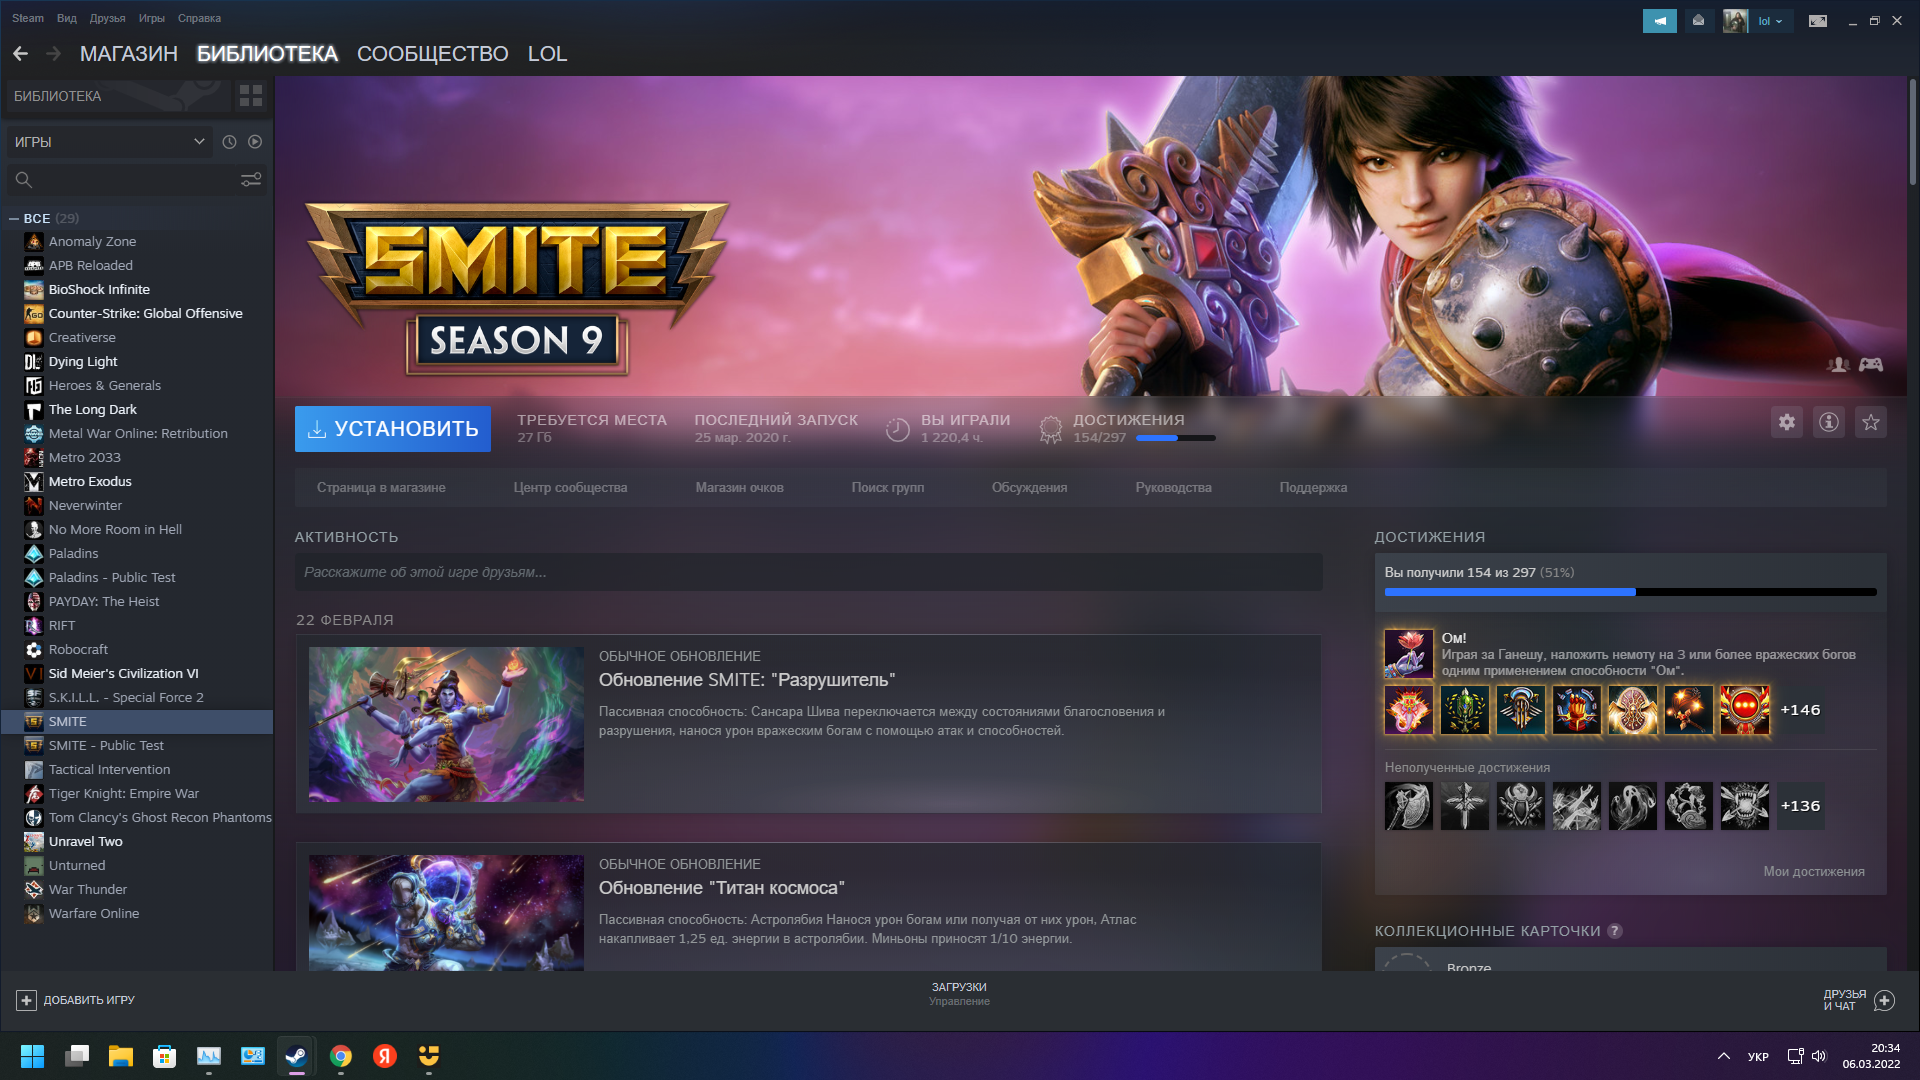 How to access smite account - My, Steam, Steamgifts, Инди, Unity, Xbox, Smite, Help, 